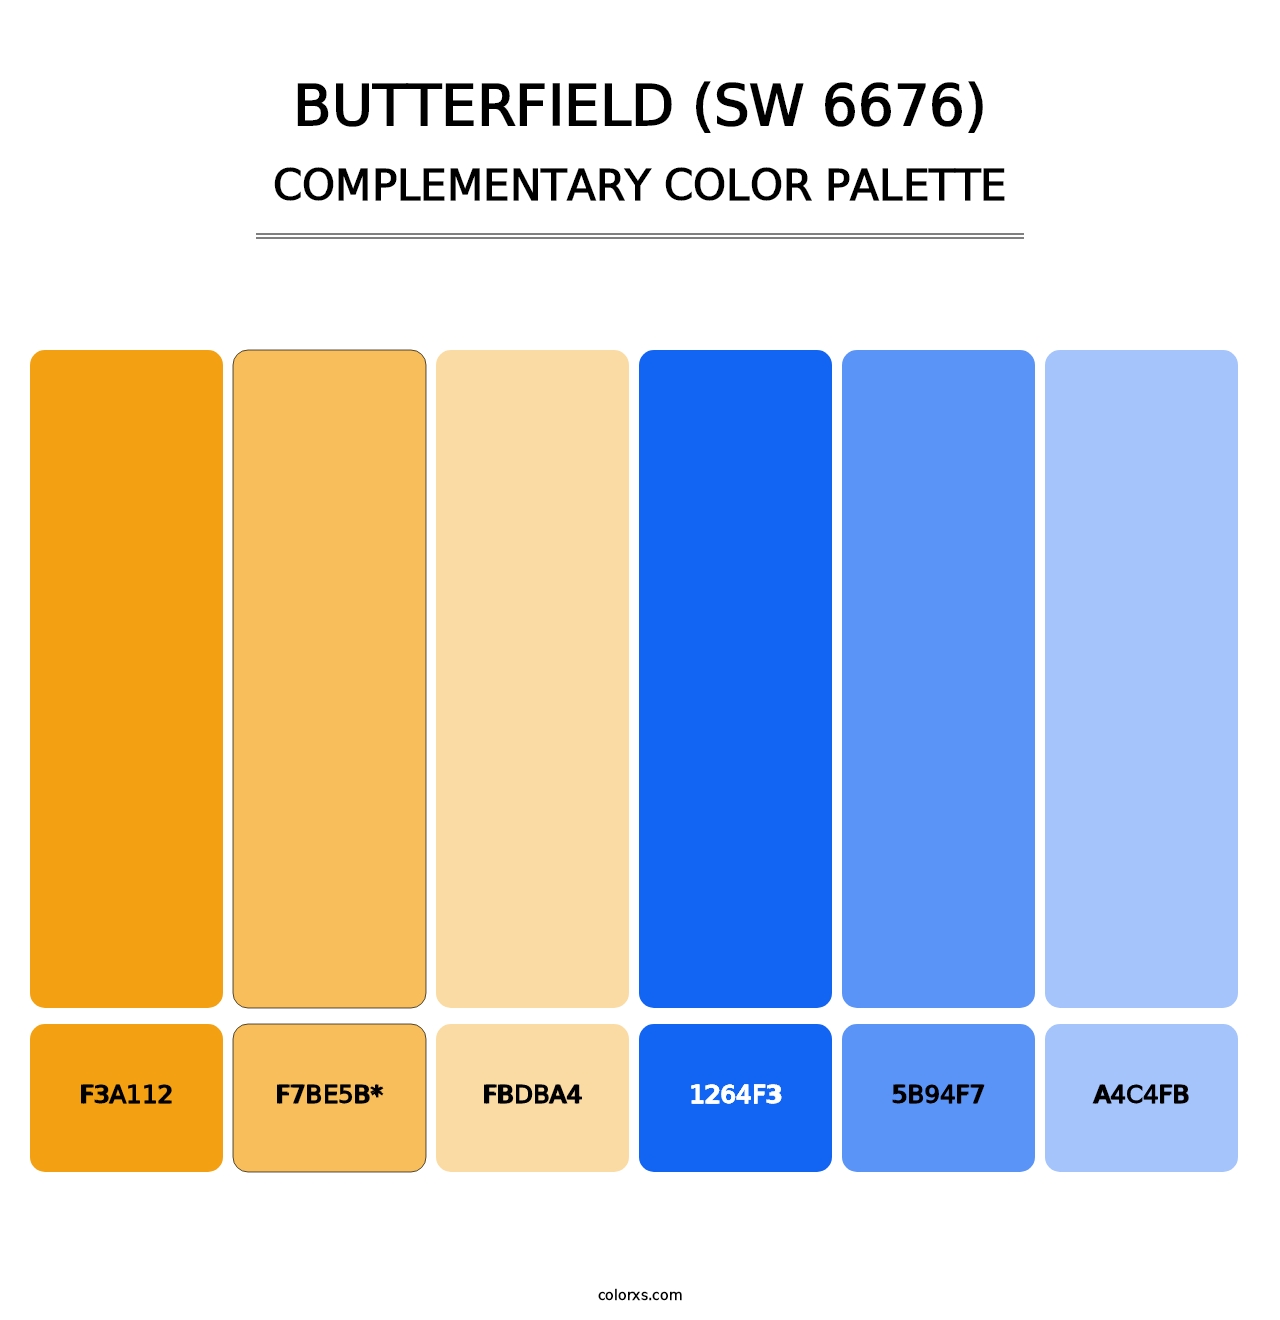 Butterfield (SW 6676) - Complementary Color Palette